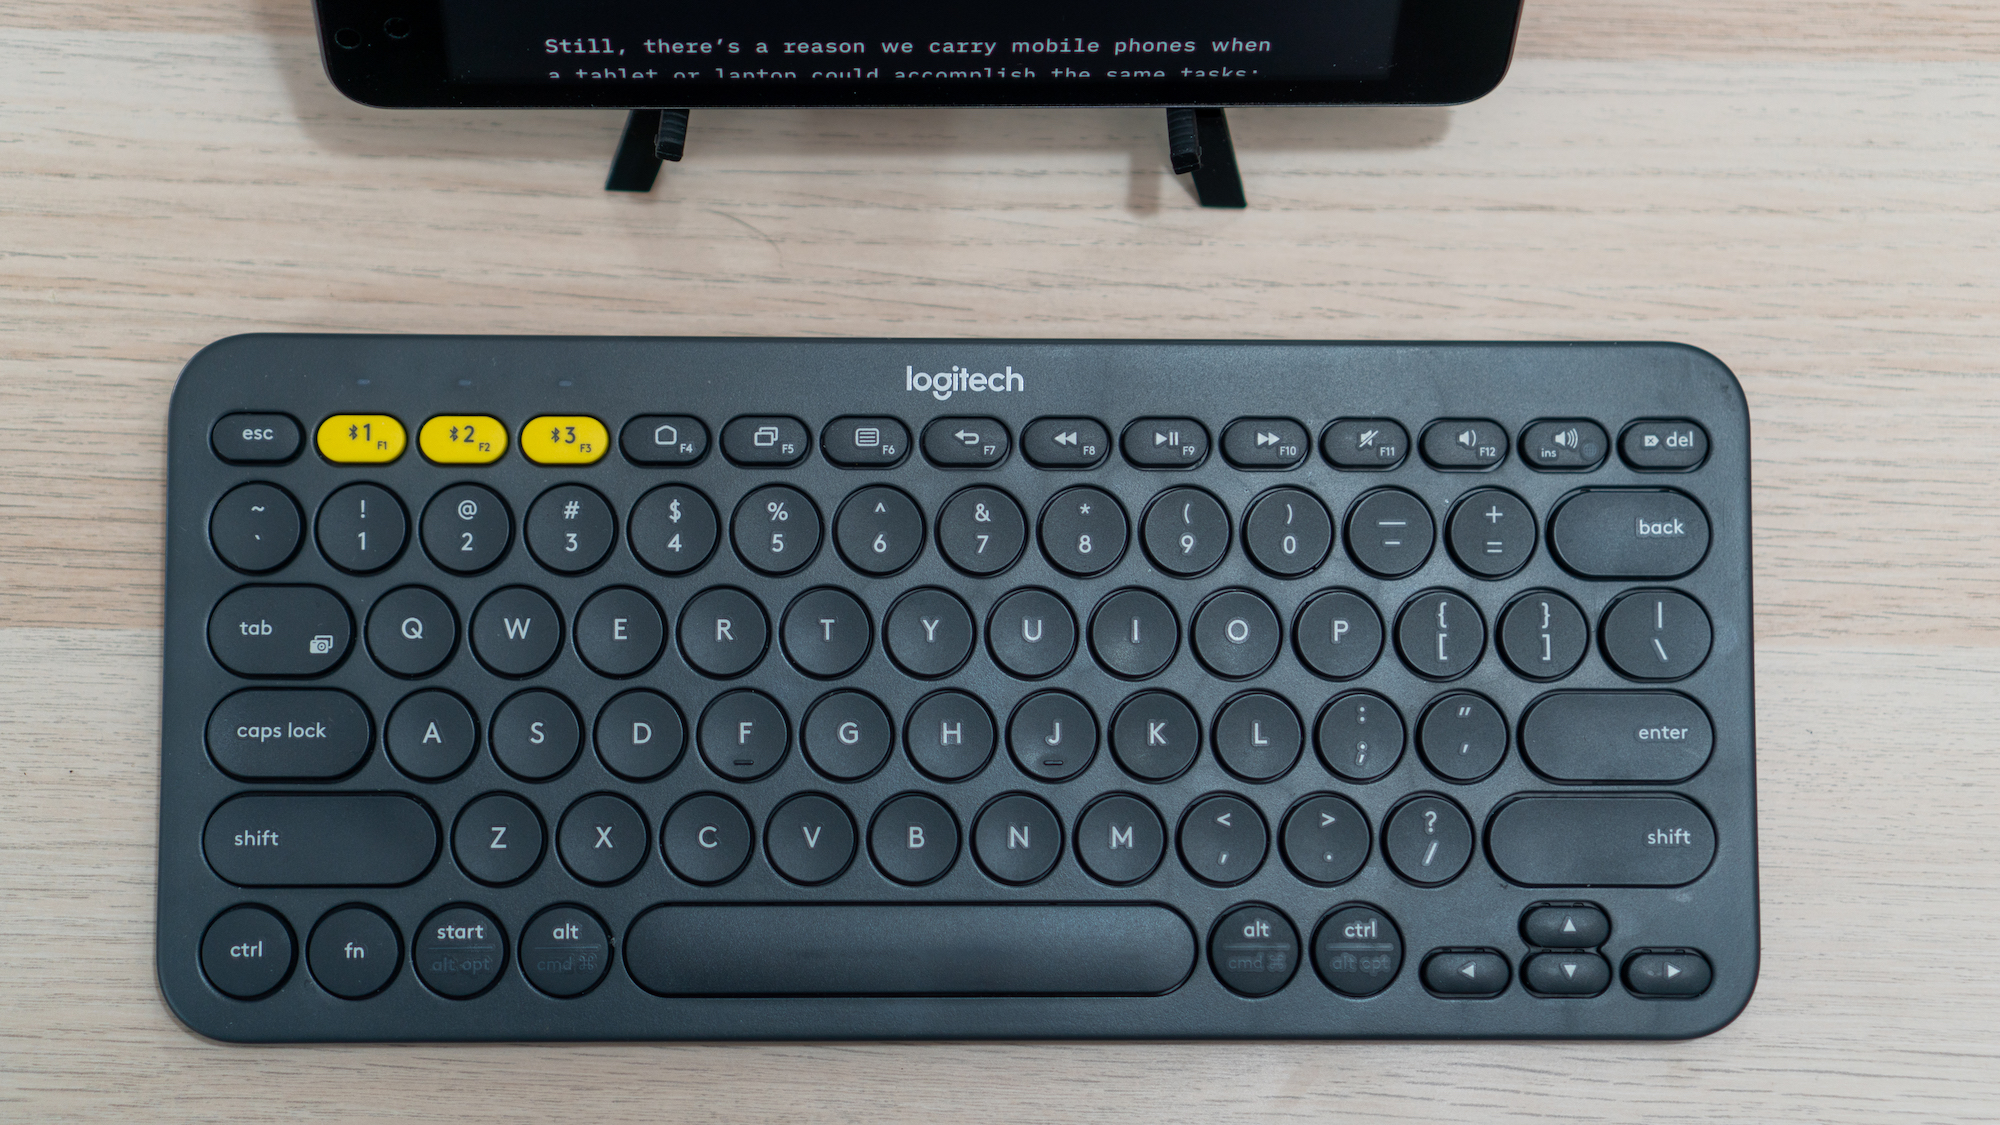 Logitech's K380 keyboard is sturdy and the old-school AAA batteries last two years.